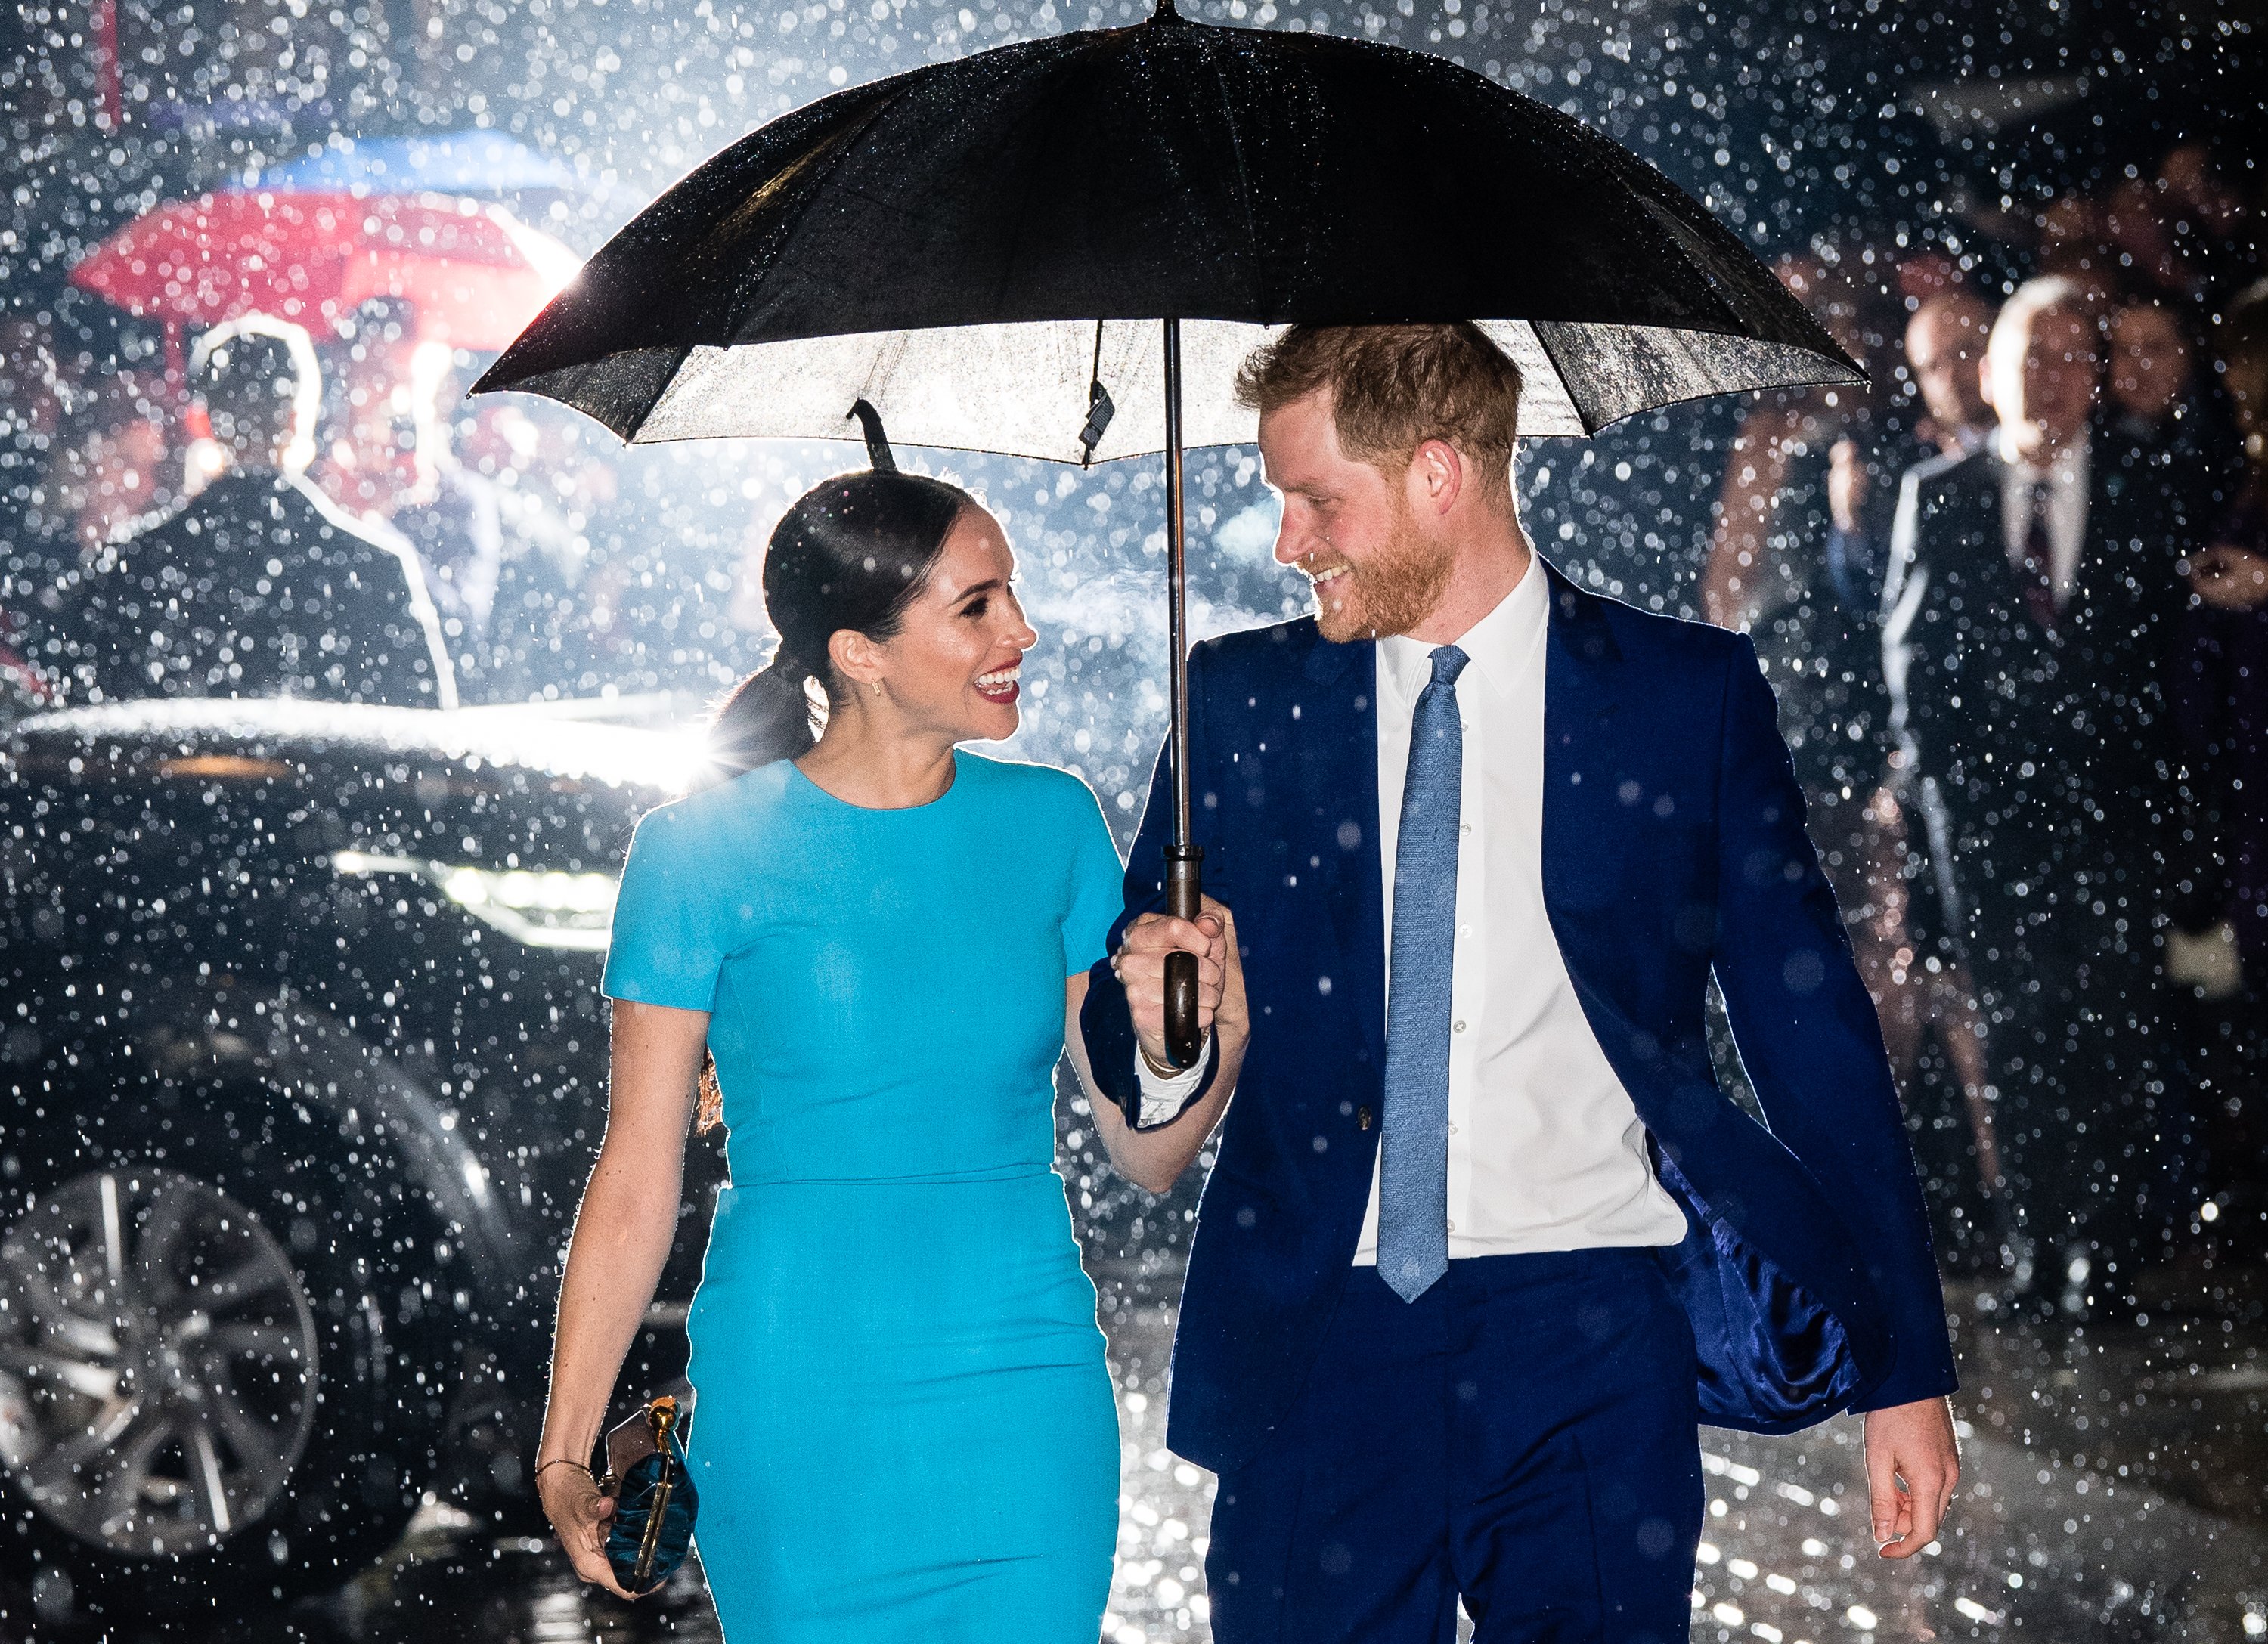 Prince Harry, Duke of Sussex and Meghan, Duchess of Sussex attend The Endeavour Fund Awards on March 05, 2020, in London, England. | Photo: Getty Images.